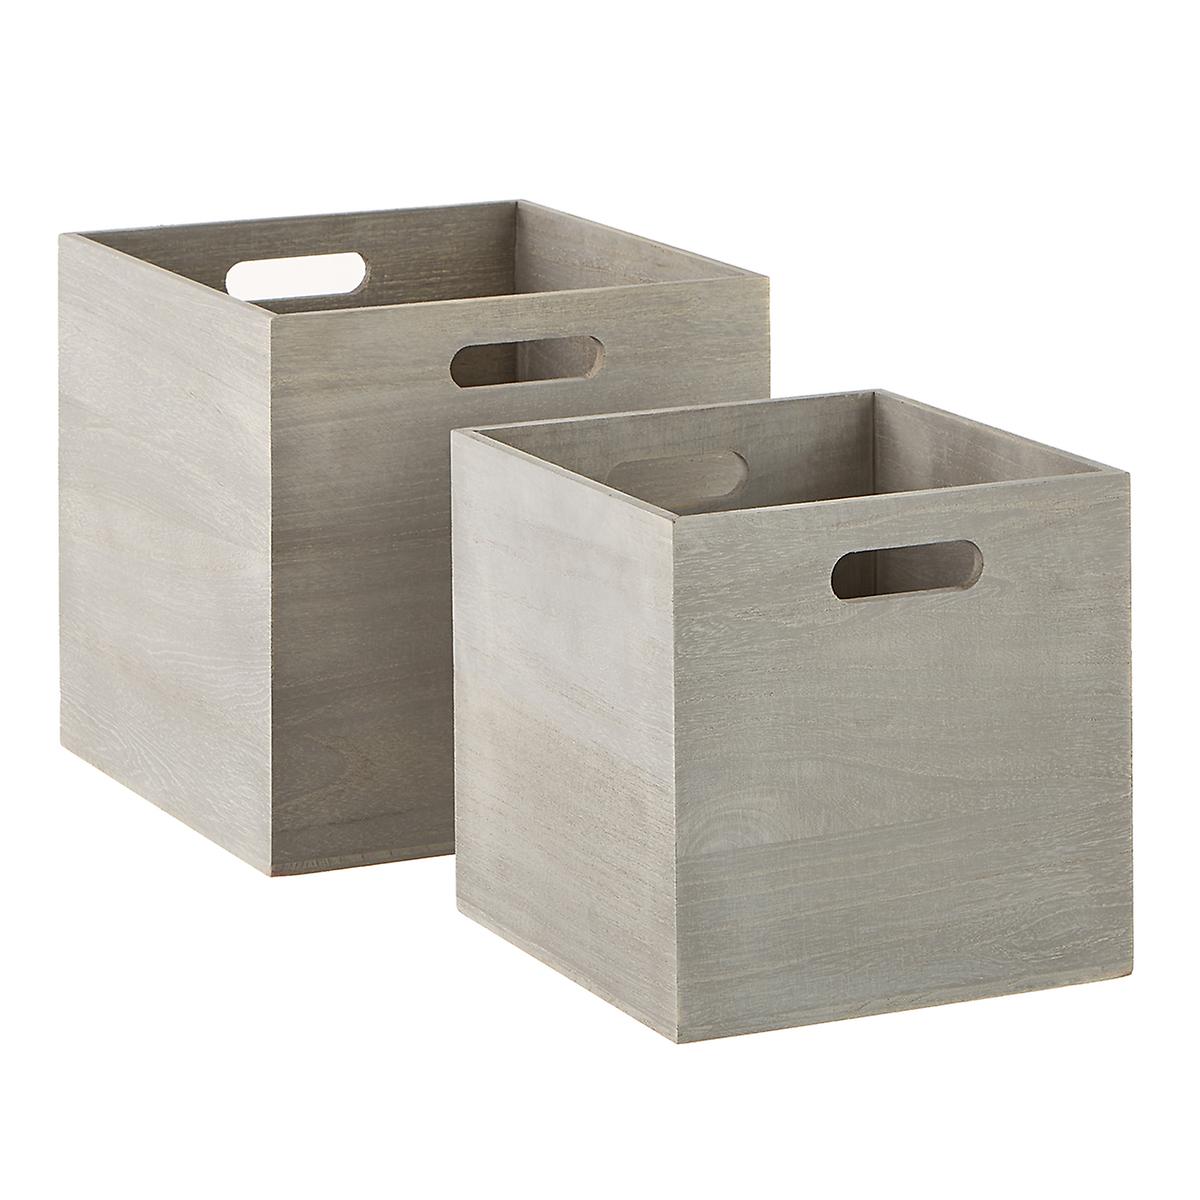 Greywashed Wooden Storage Cubes with Handles